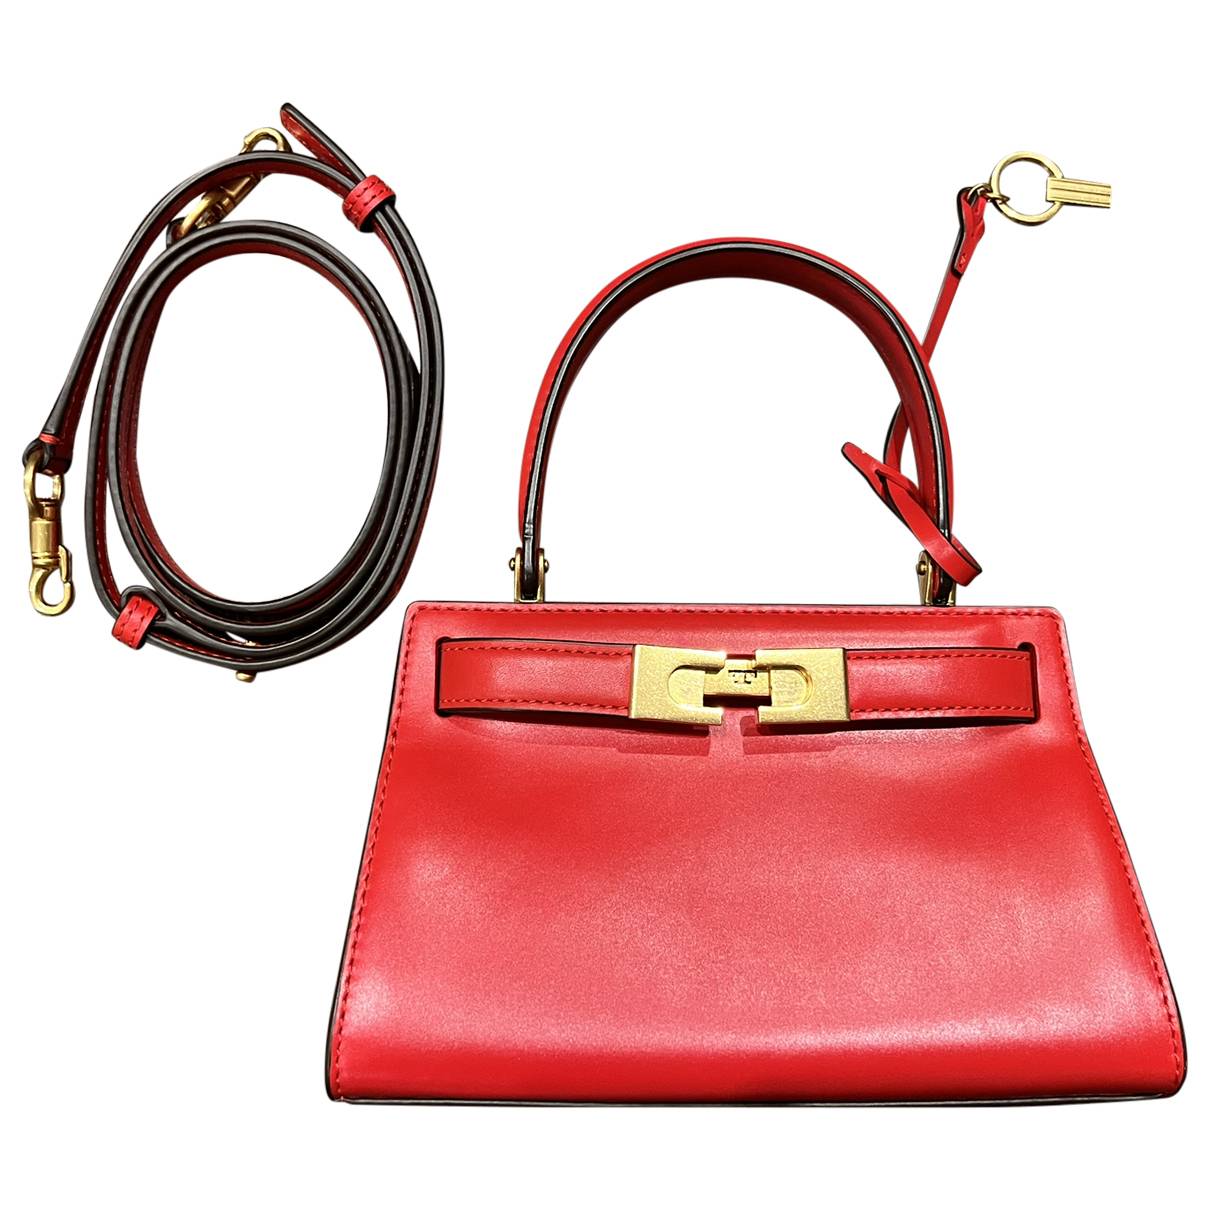 Lee radziwill petite leather mini bag Tory Burch Red in Leather